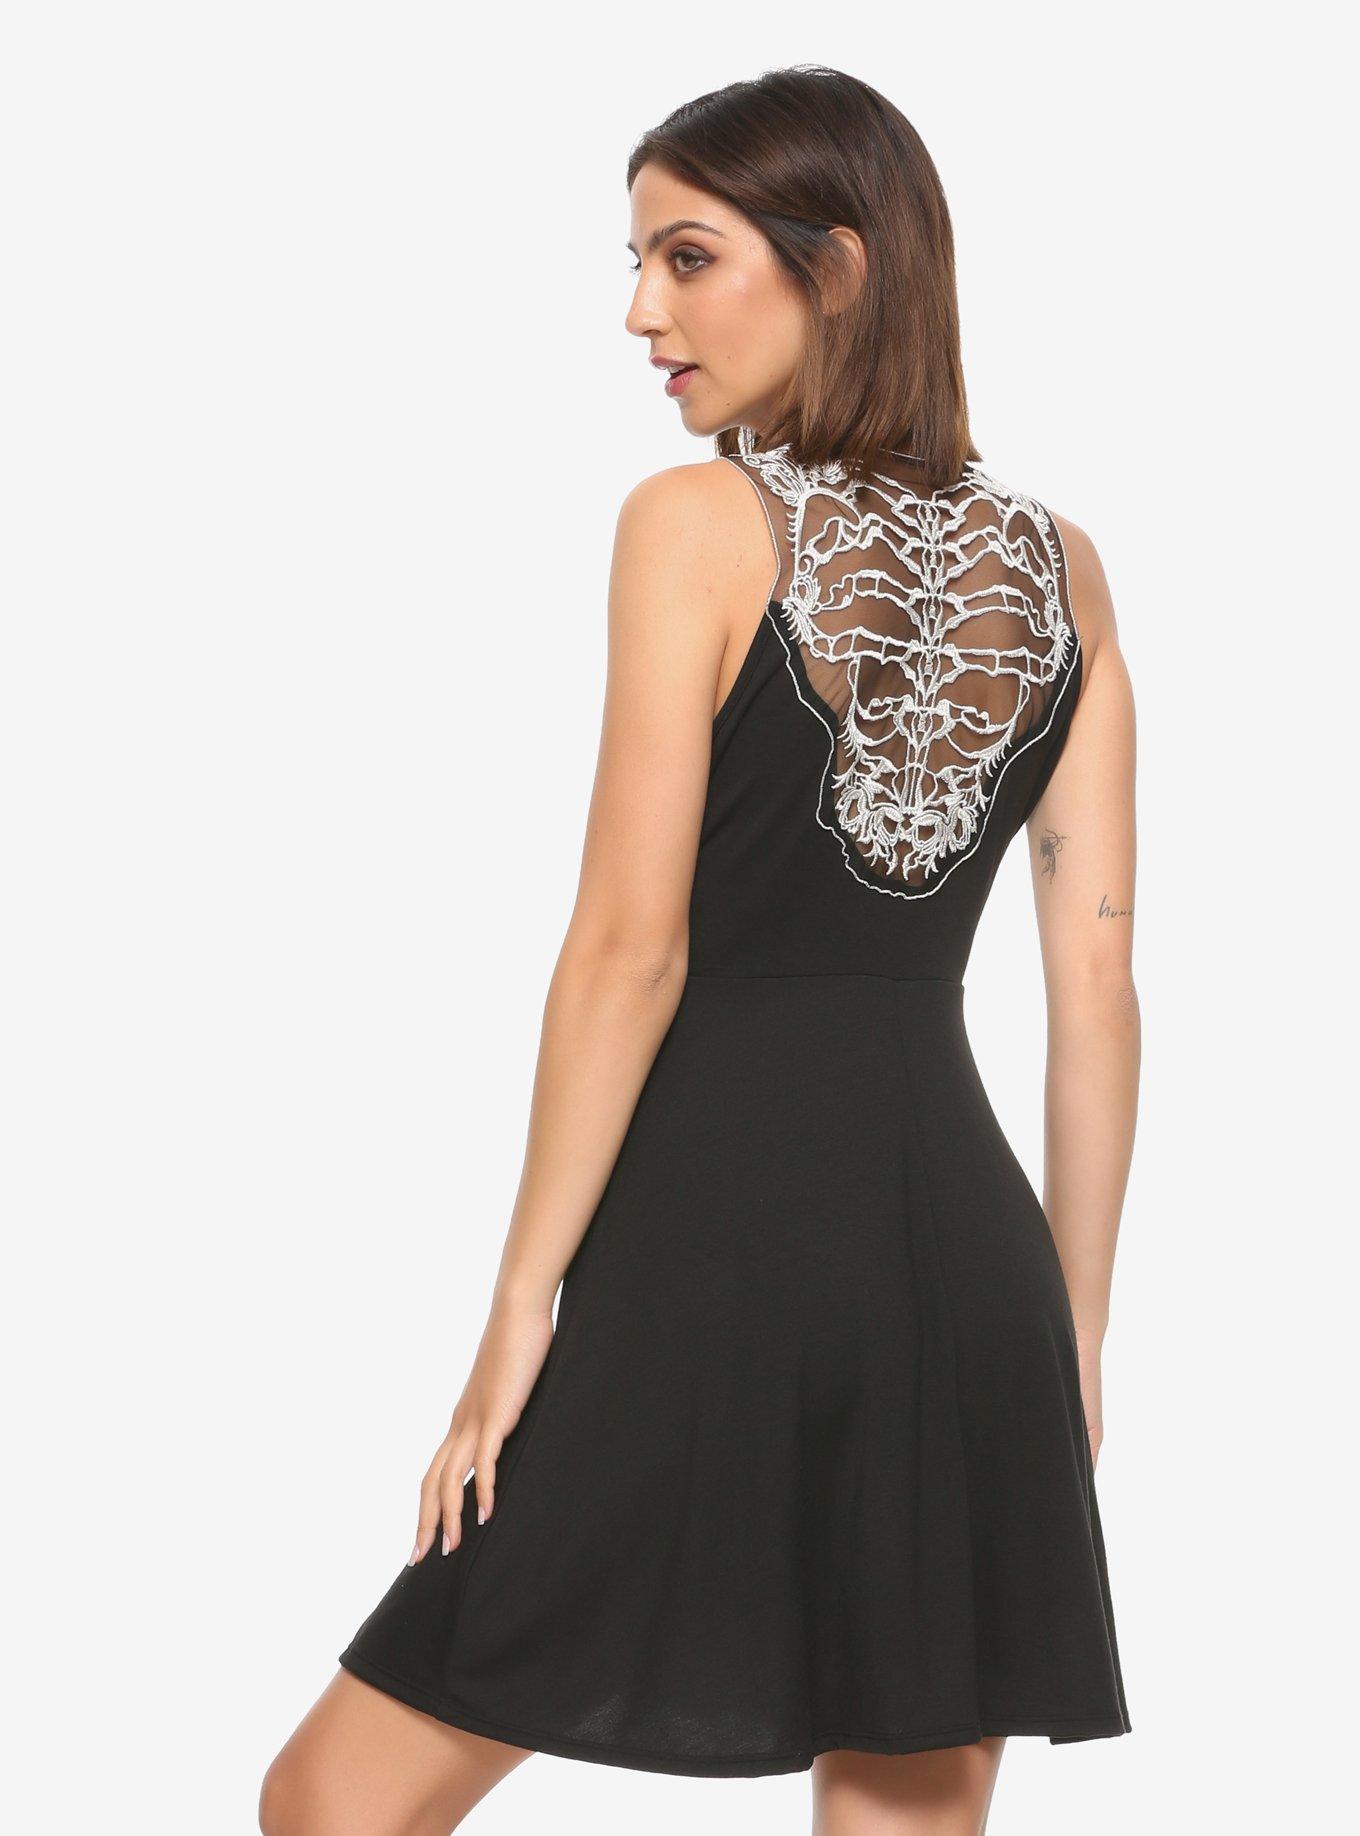 Lace Spine Skater Dress | Hot Topic